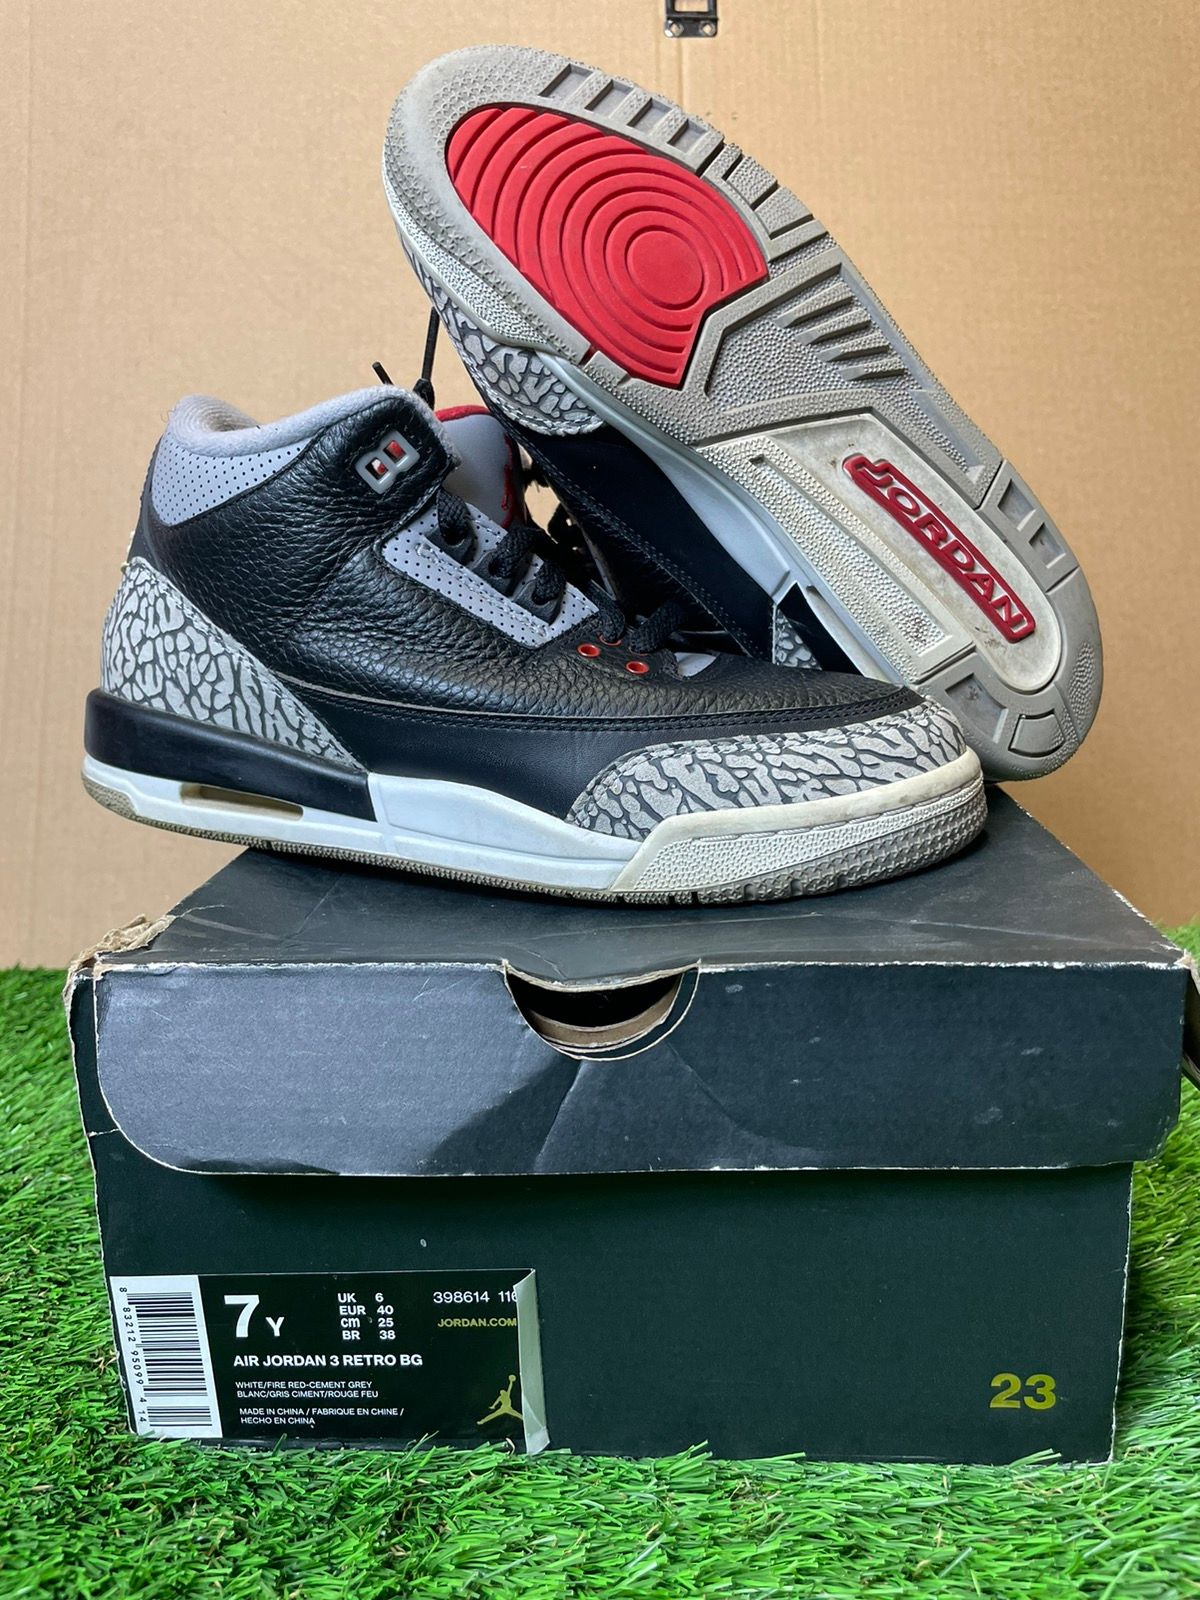 Pre-owned Jordan Brand 3 Black Cement Size 7 Used Shoes